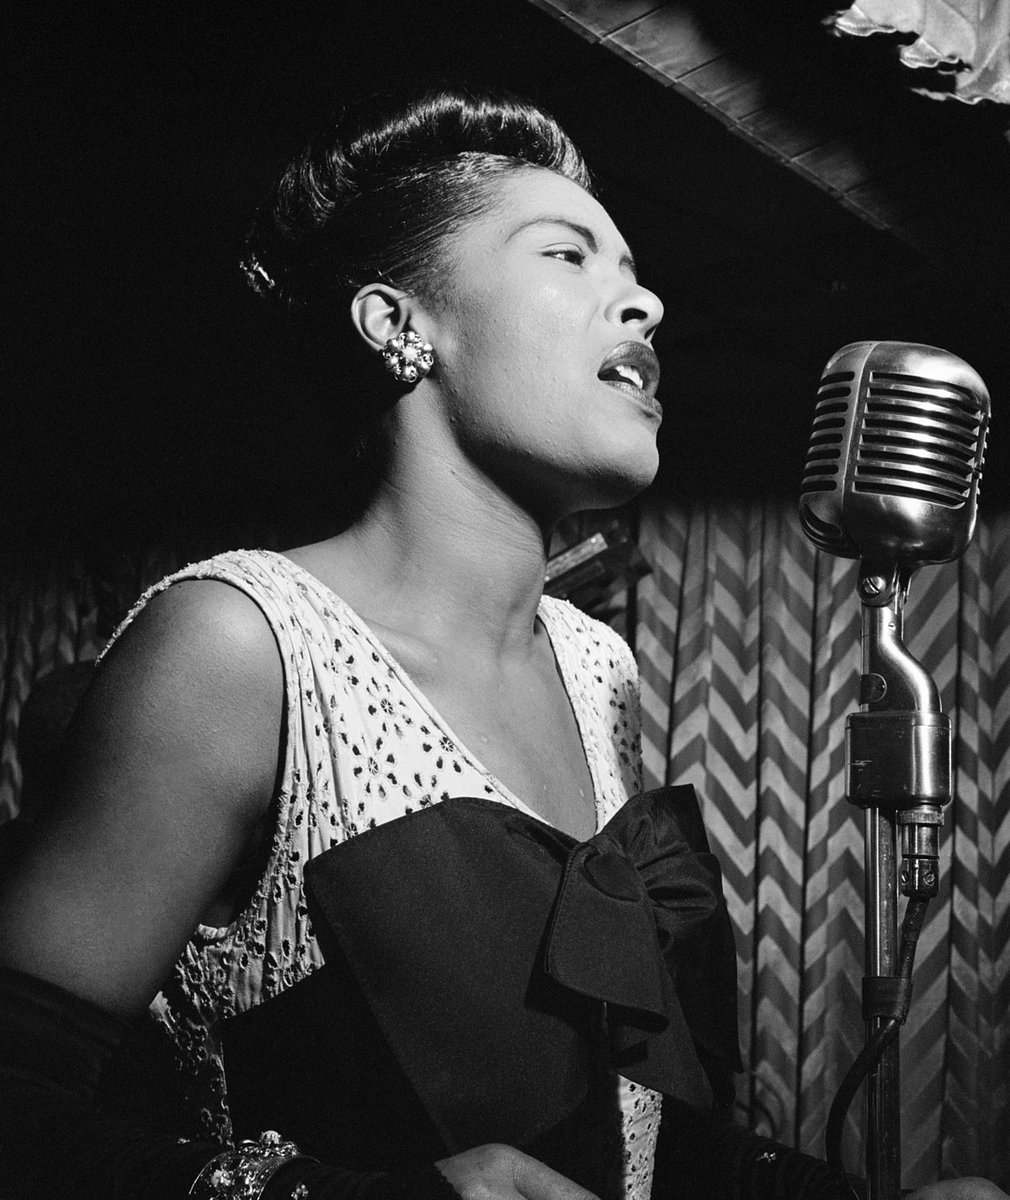 5. Take, for instance, the bacchanalian birthday bash she threw for her *six year-old son*. It went all night. Billie Holiday, Benny Goodman & Gene Krupa all performed."That was one hell of a party," Holiday later remembered, "the way a party's supposed to be."